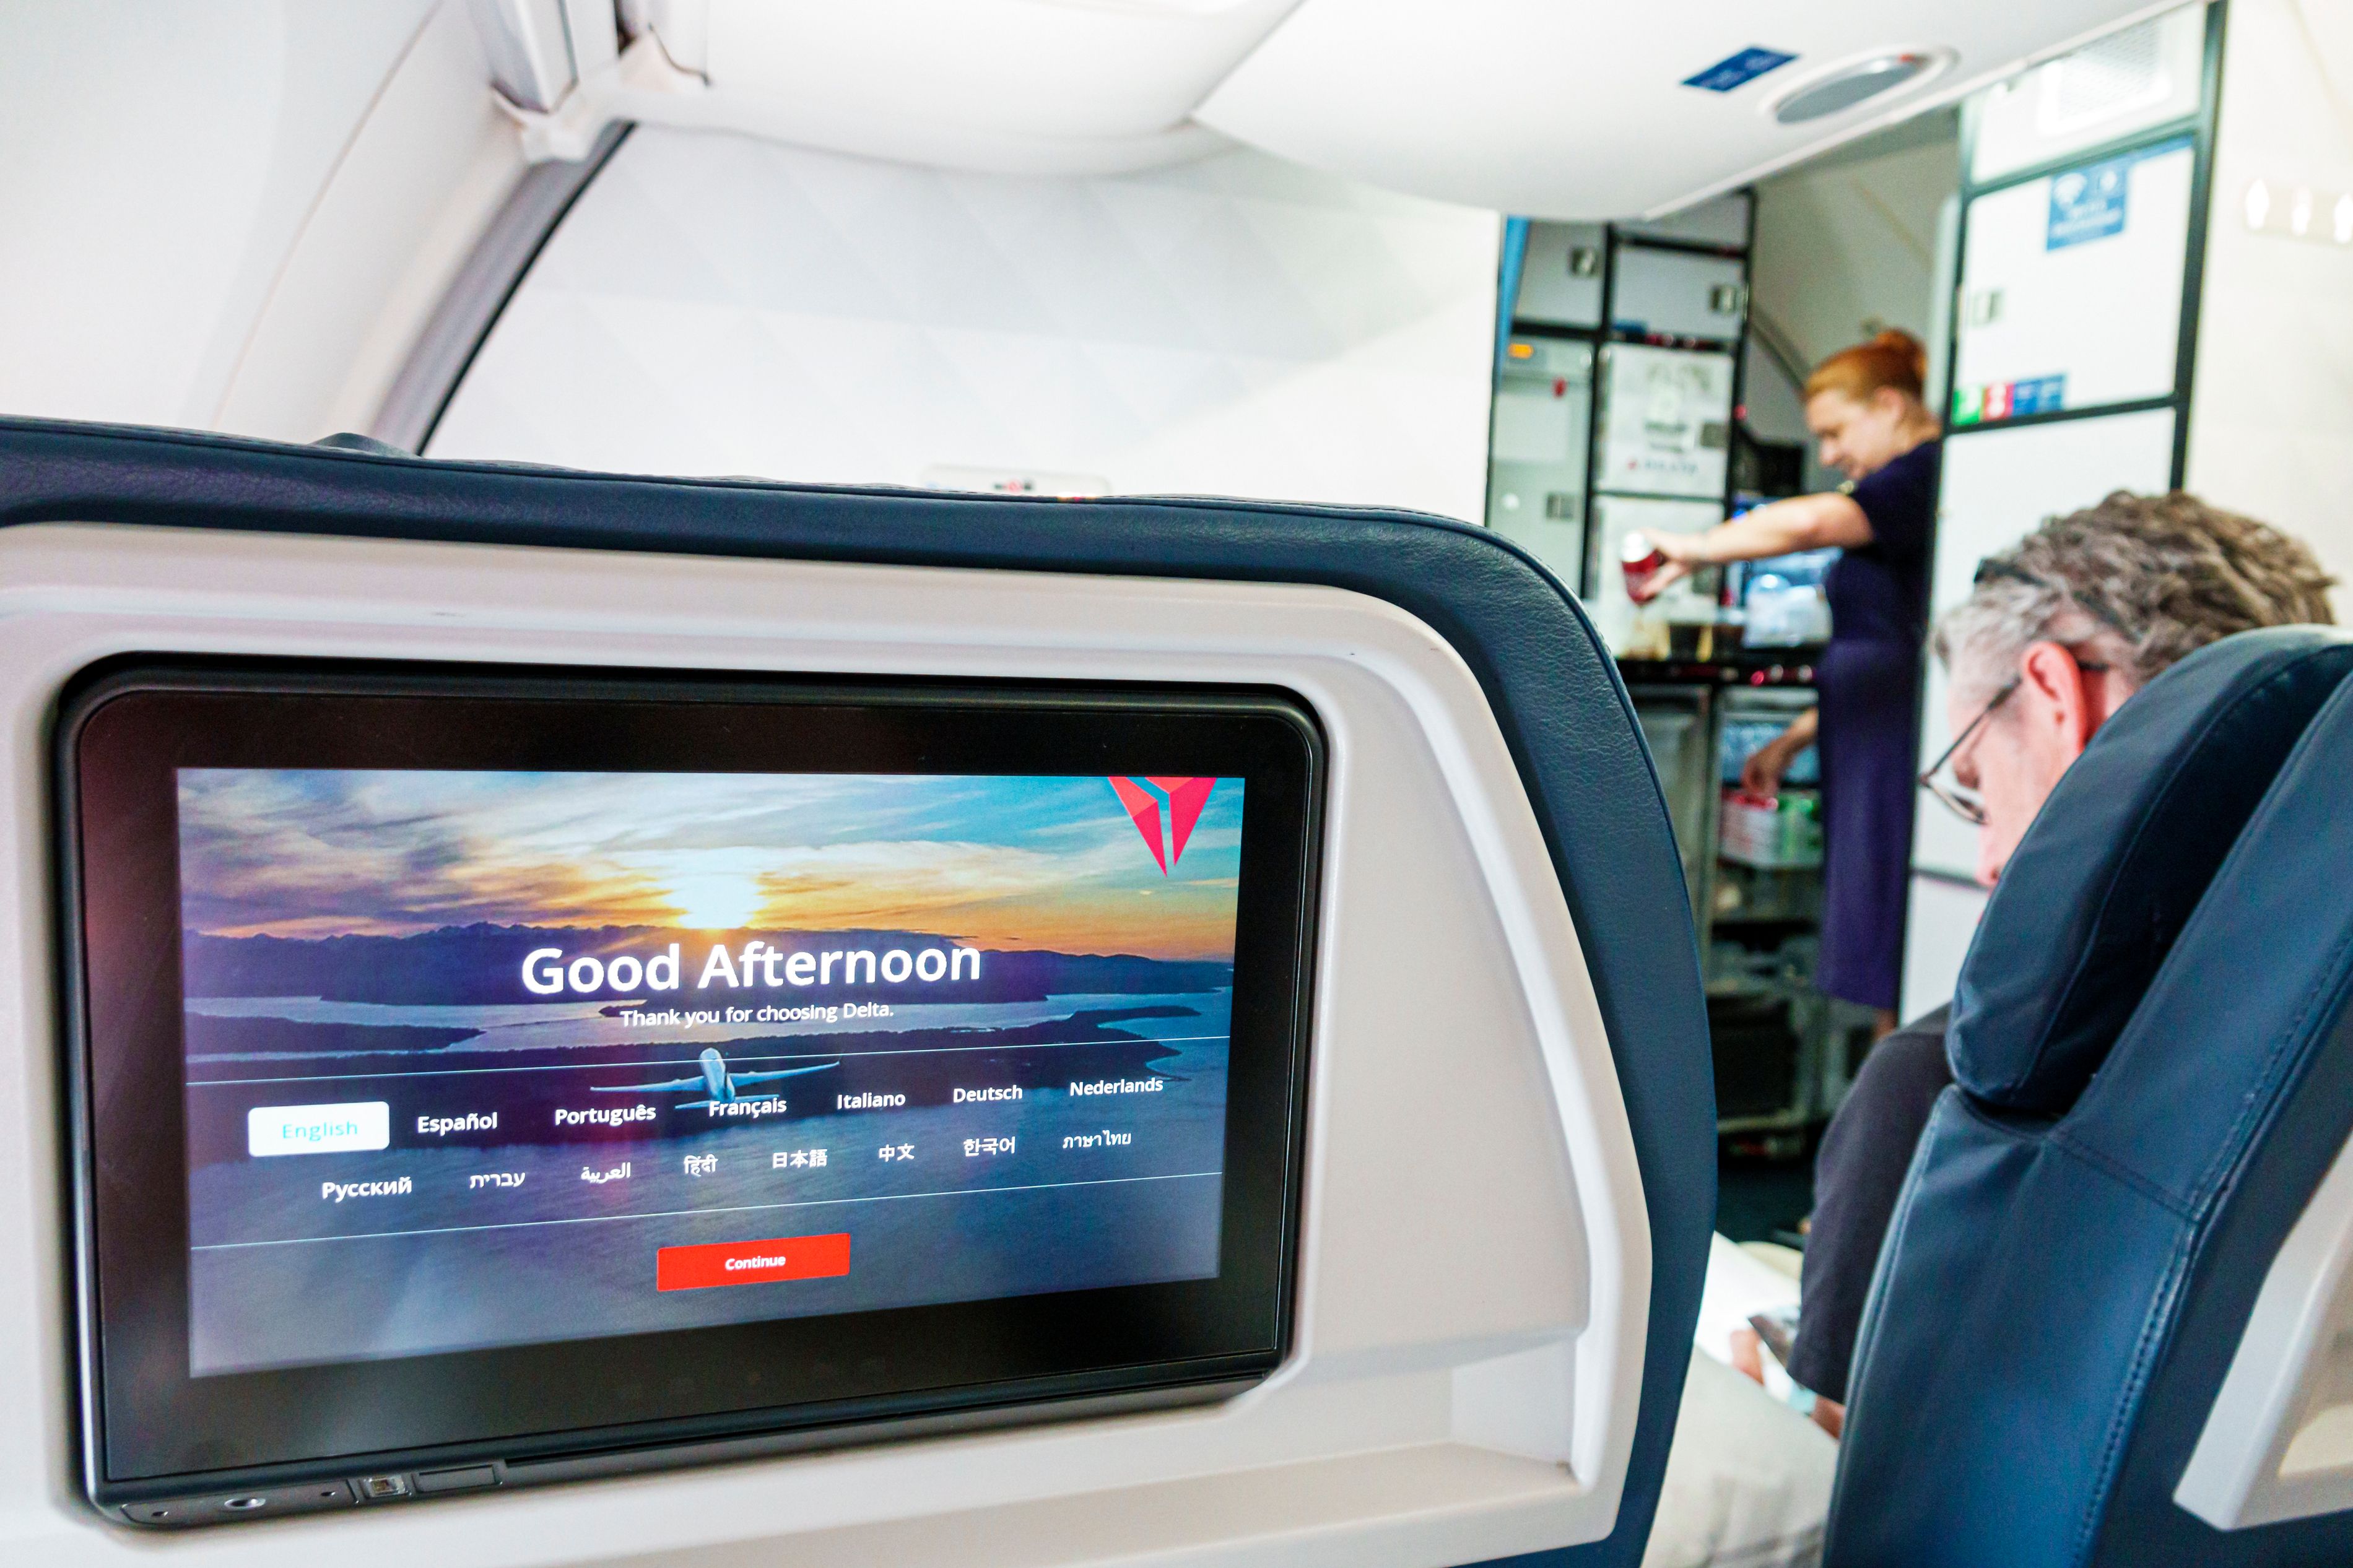 Delta SkyMiles member can now access free WiFi on select flights